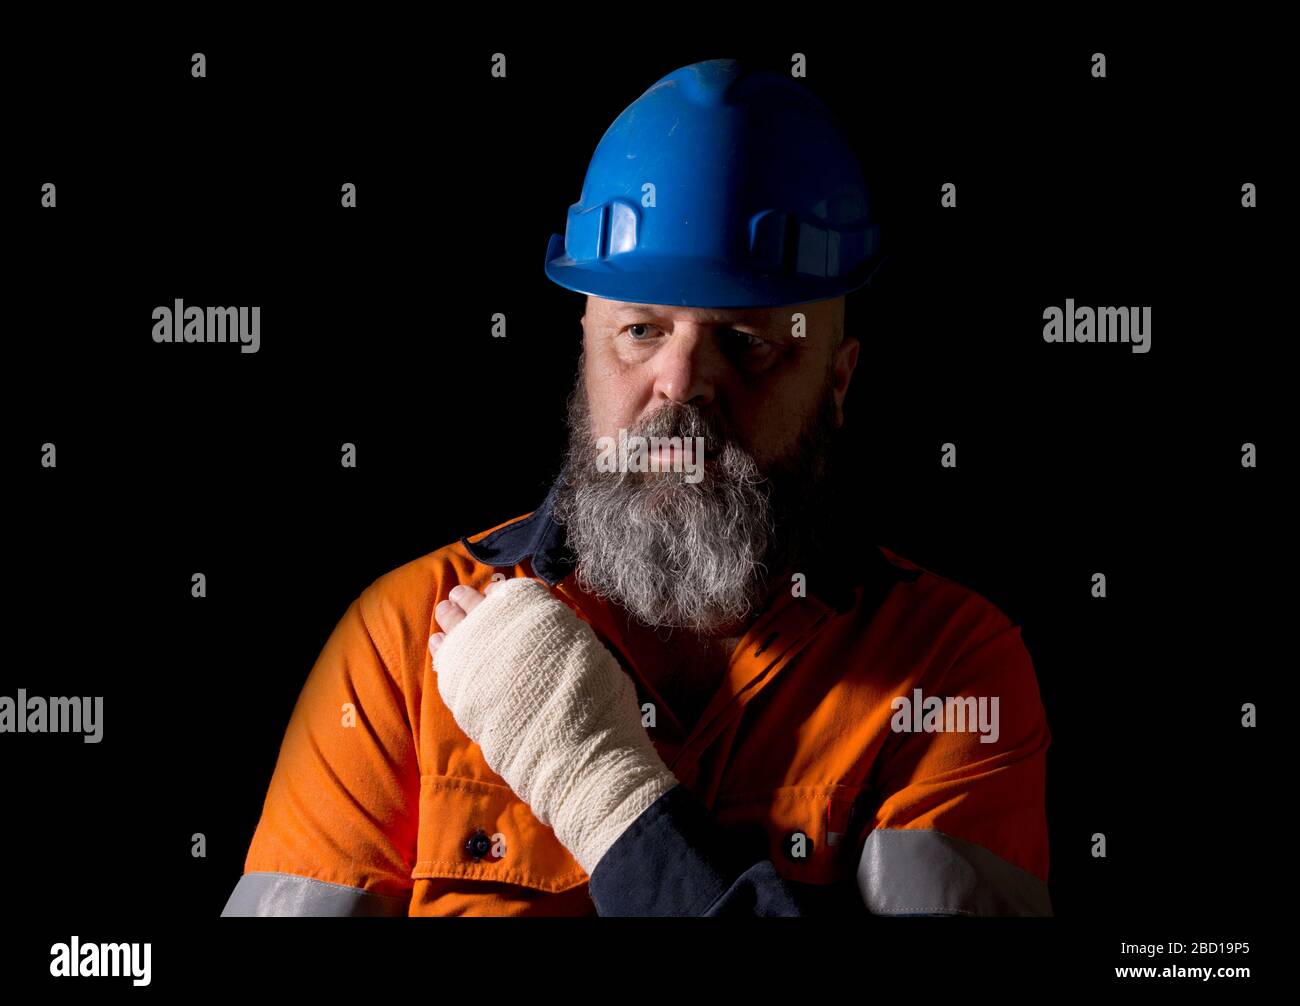 A male worker with a hand injury, on a black background with copy space. Stock Photo